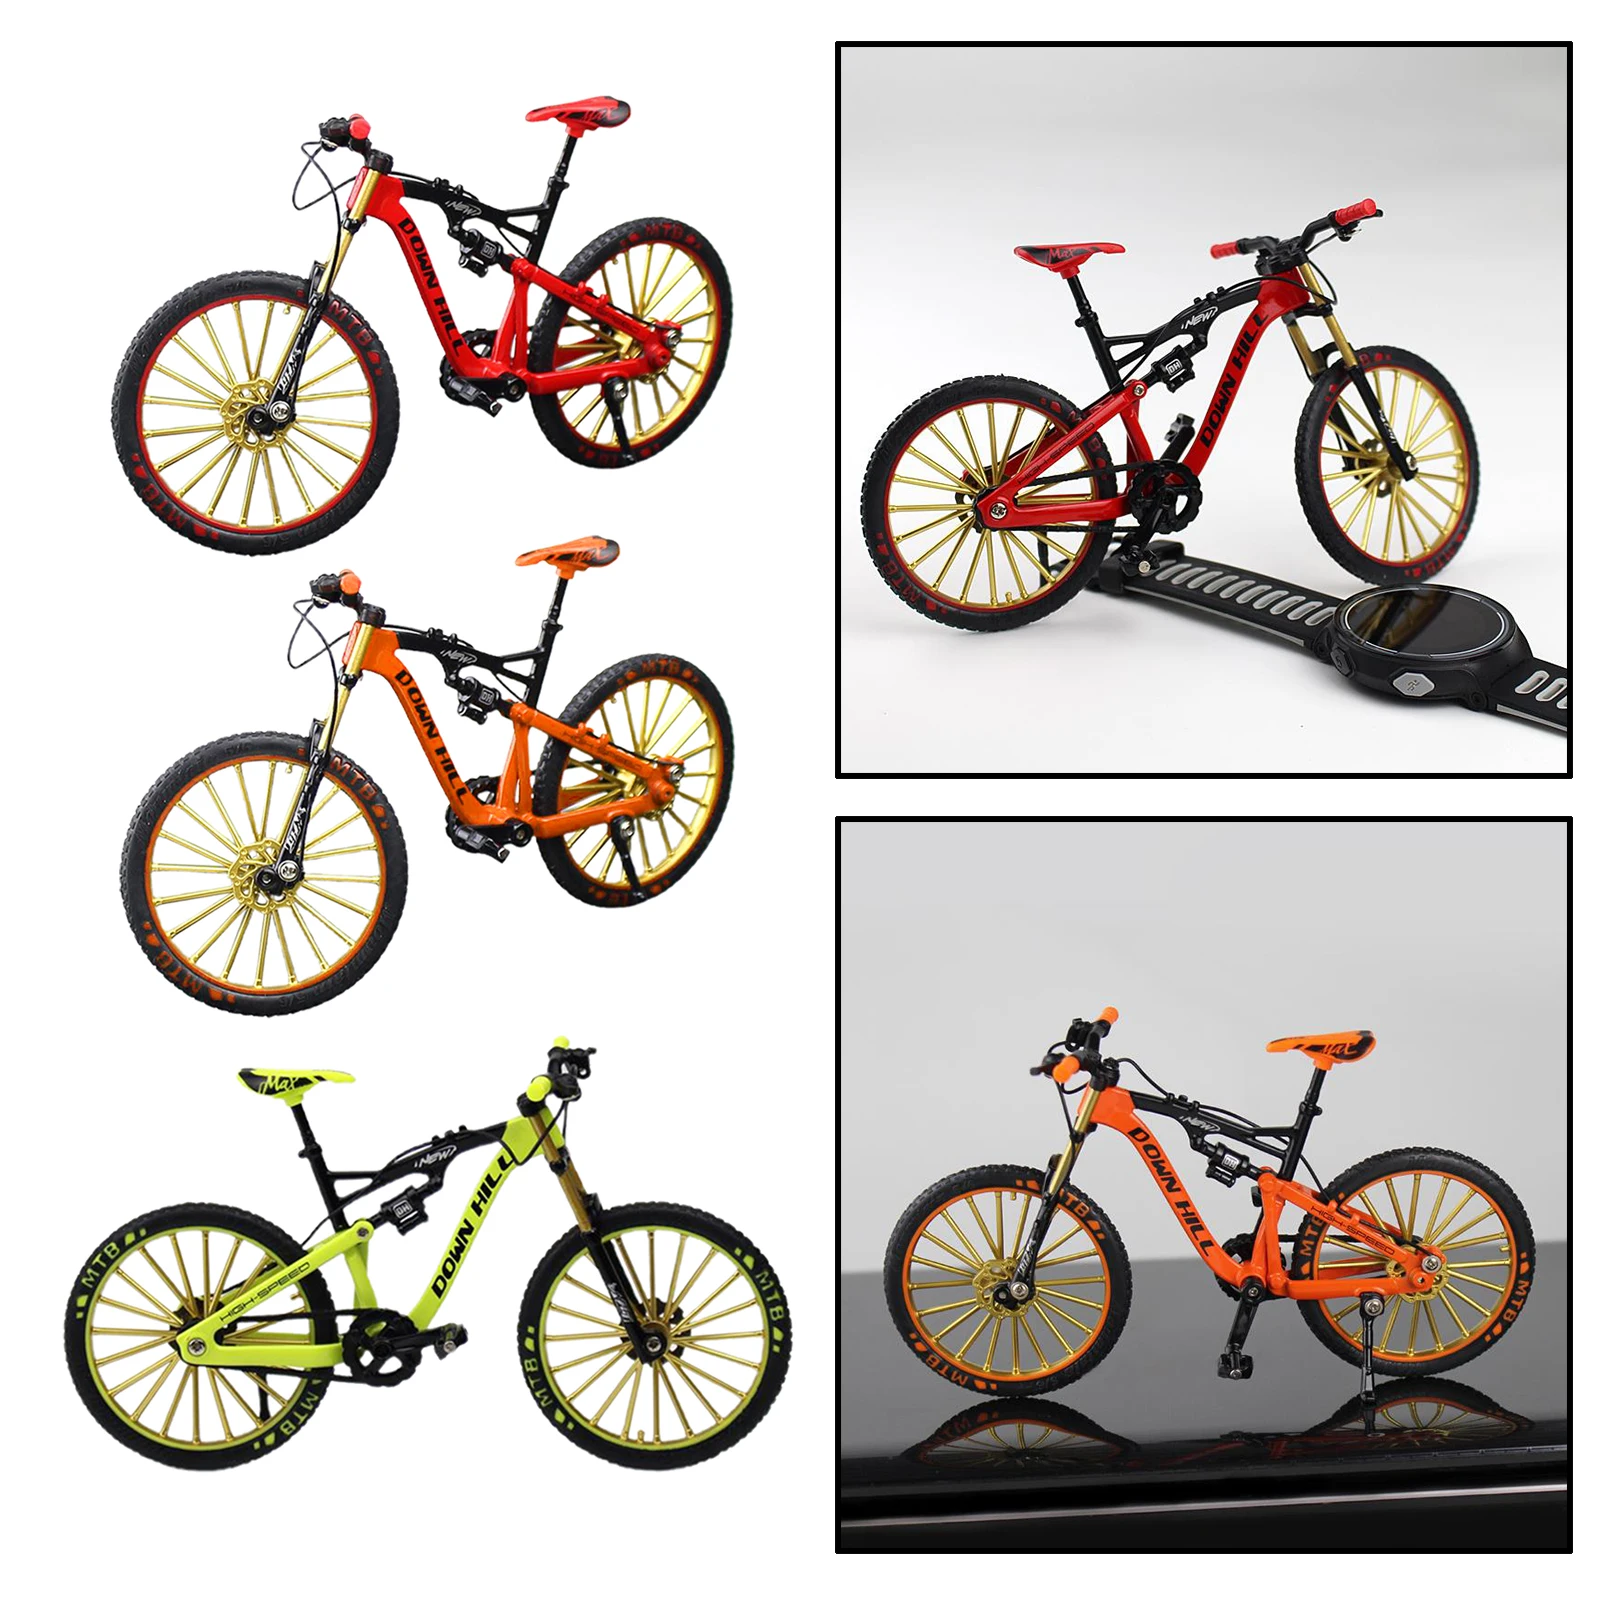 Finger Alloy Bicycle Model Mini Mountain Bike Toy Mountain Bike Model 1:10 Model Cycling Diecast Toy Desk Craft Collection